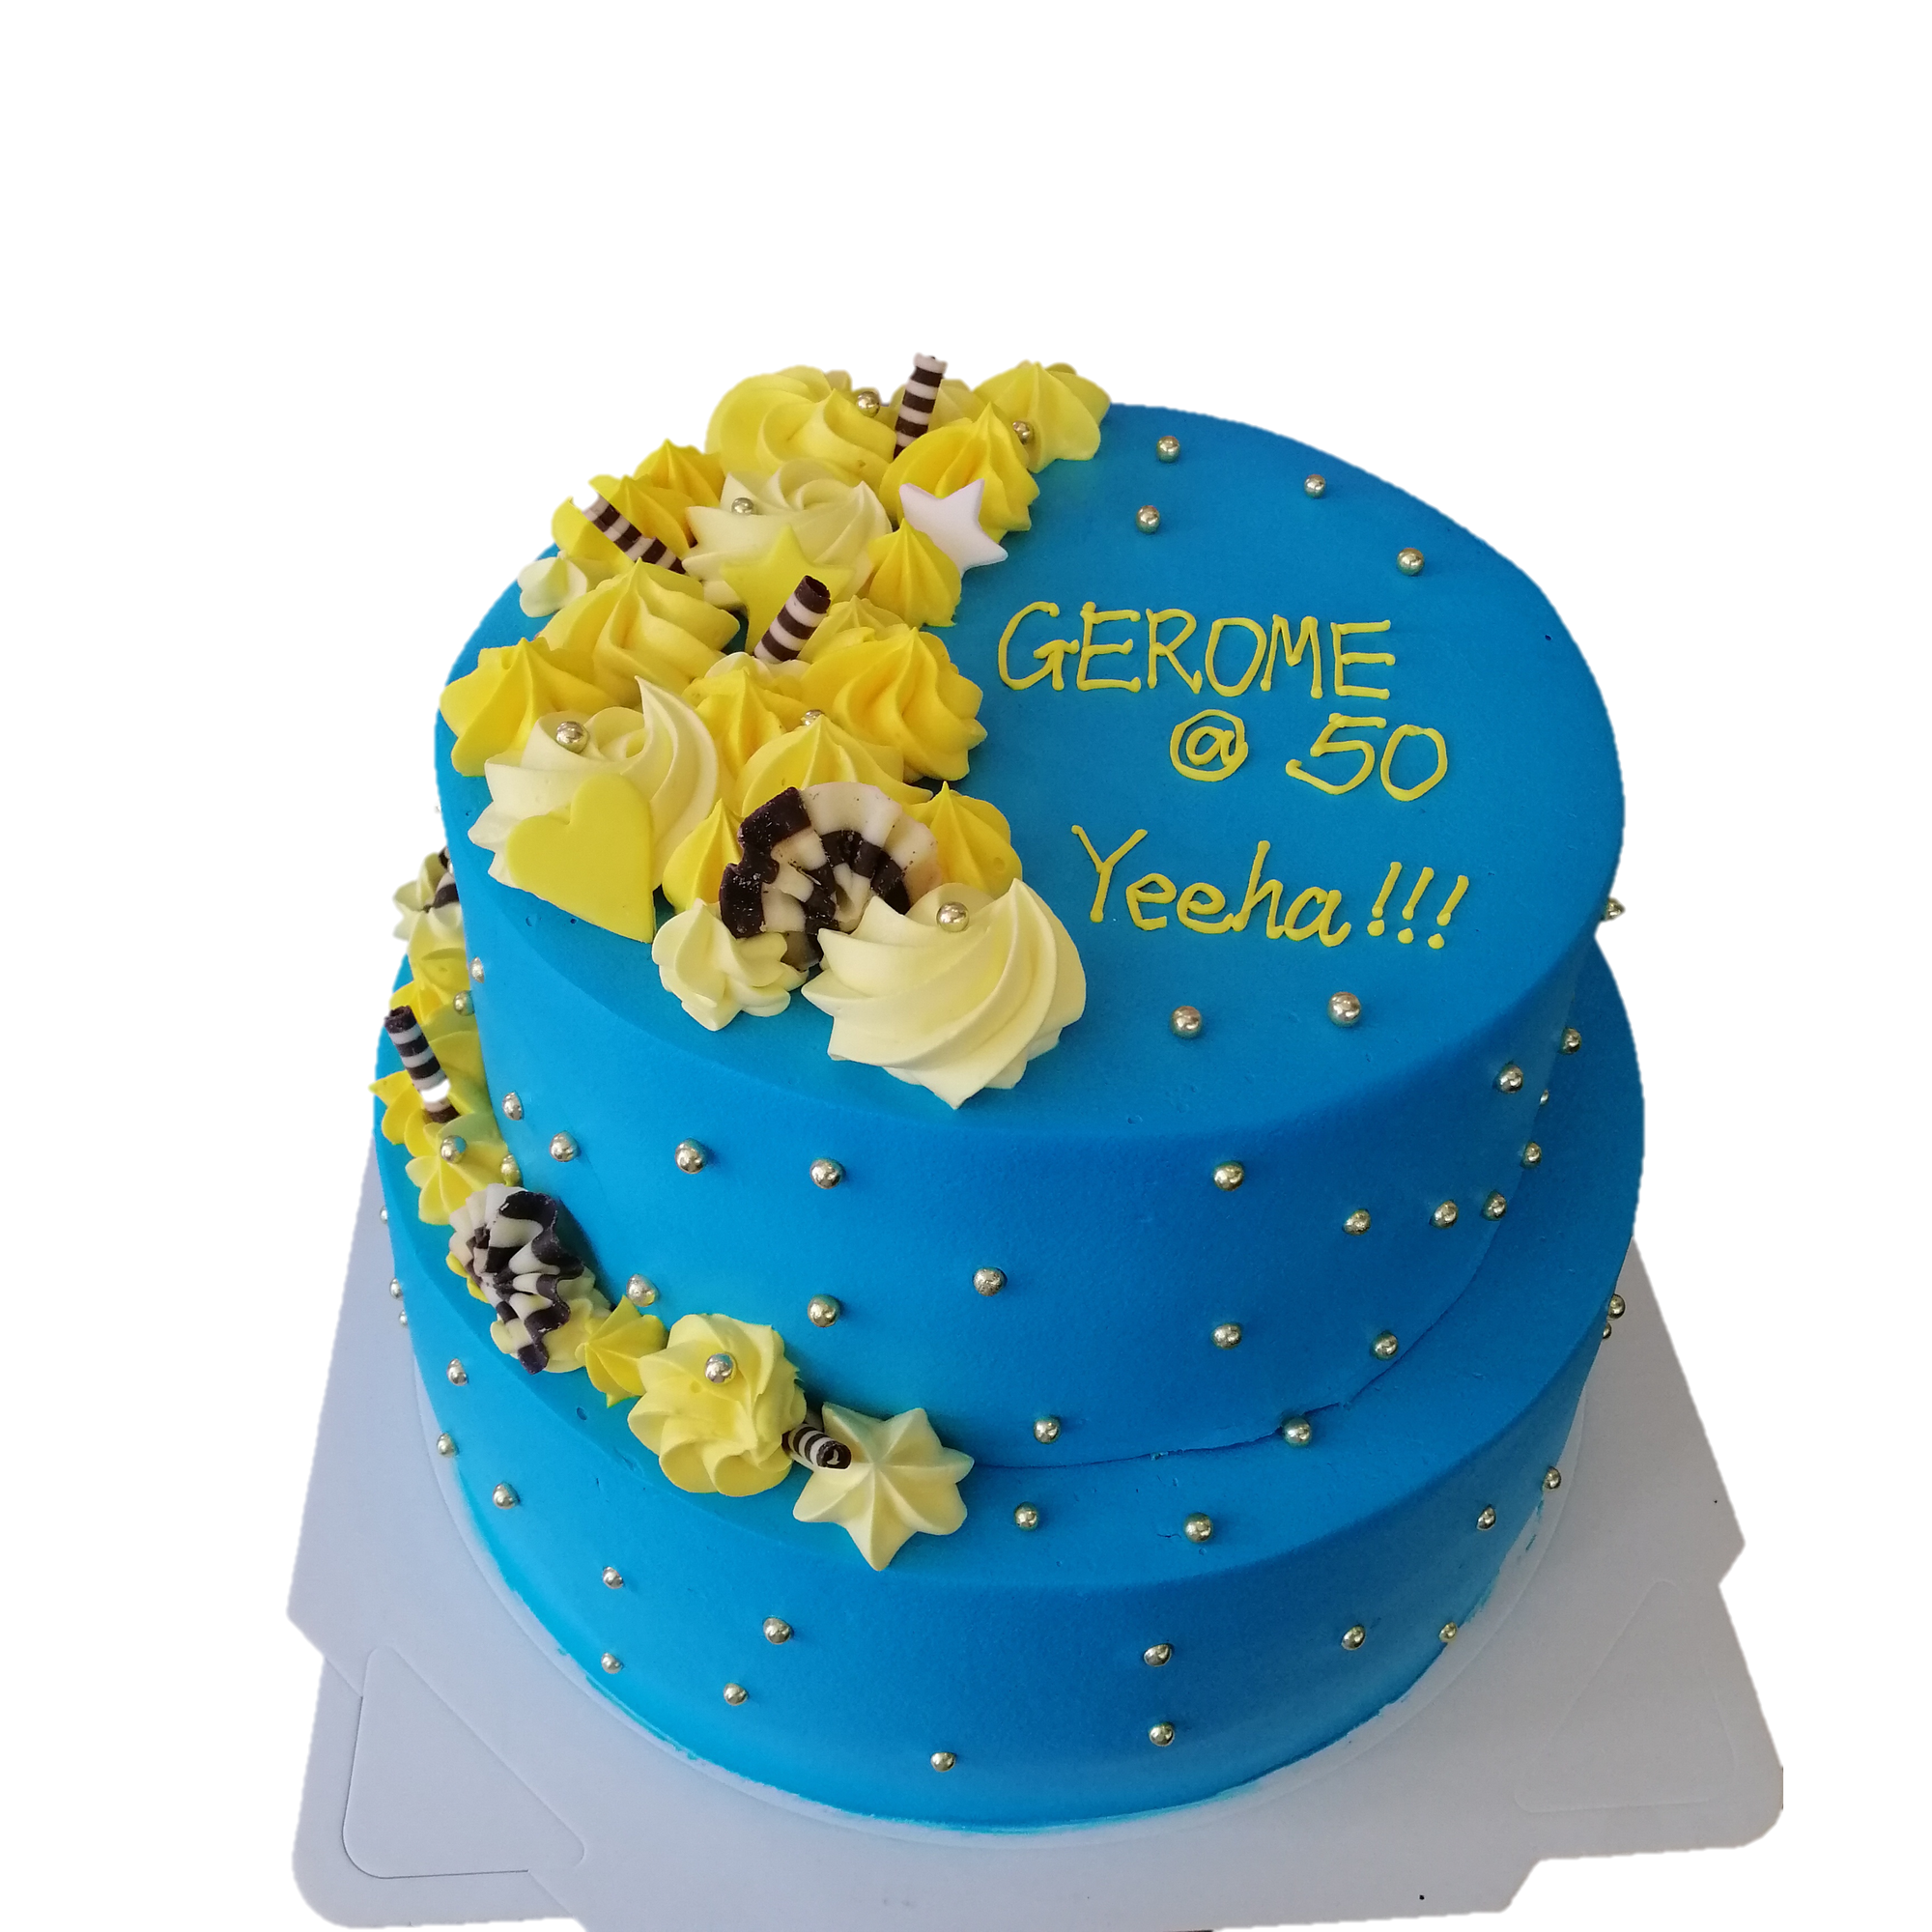 Create Amazing royal blue color cake with name